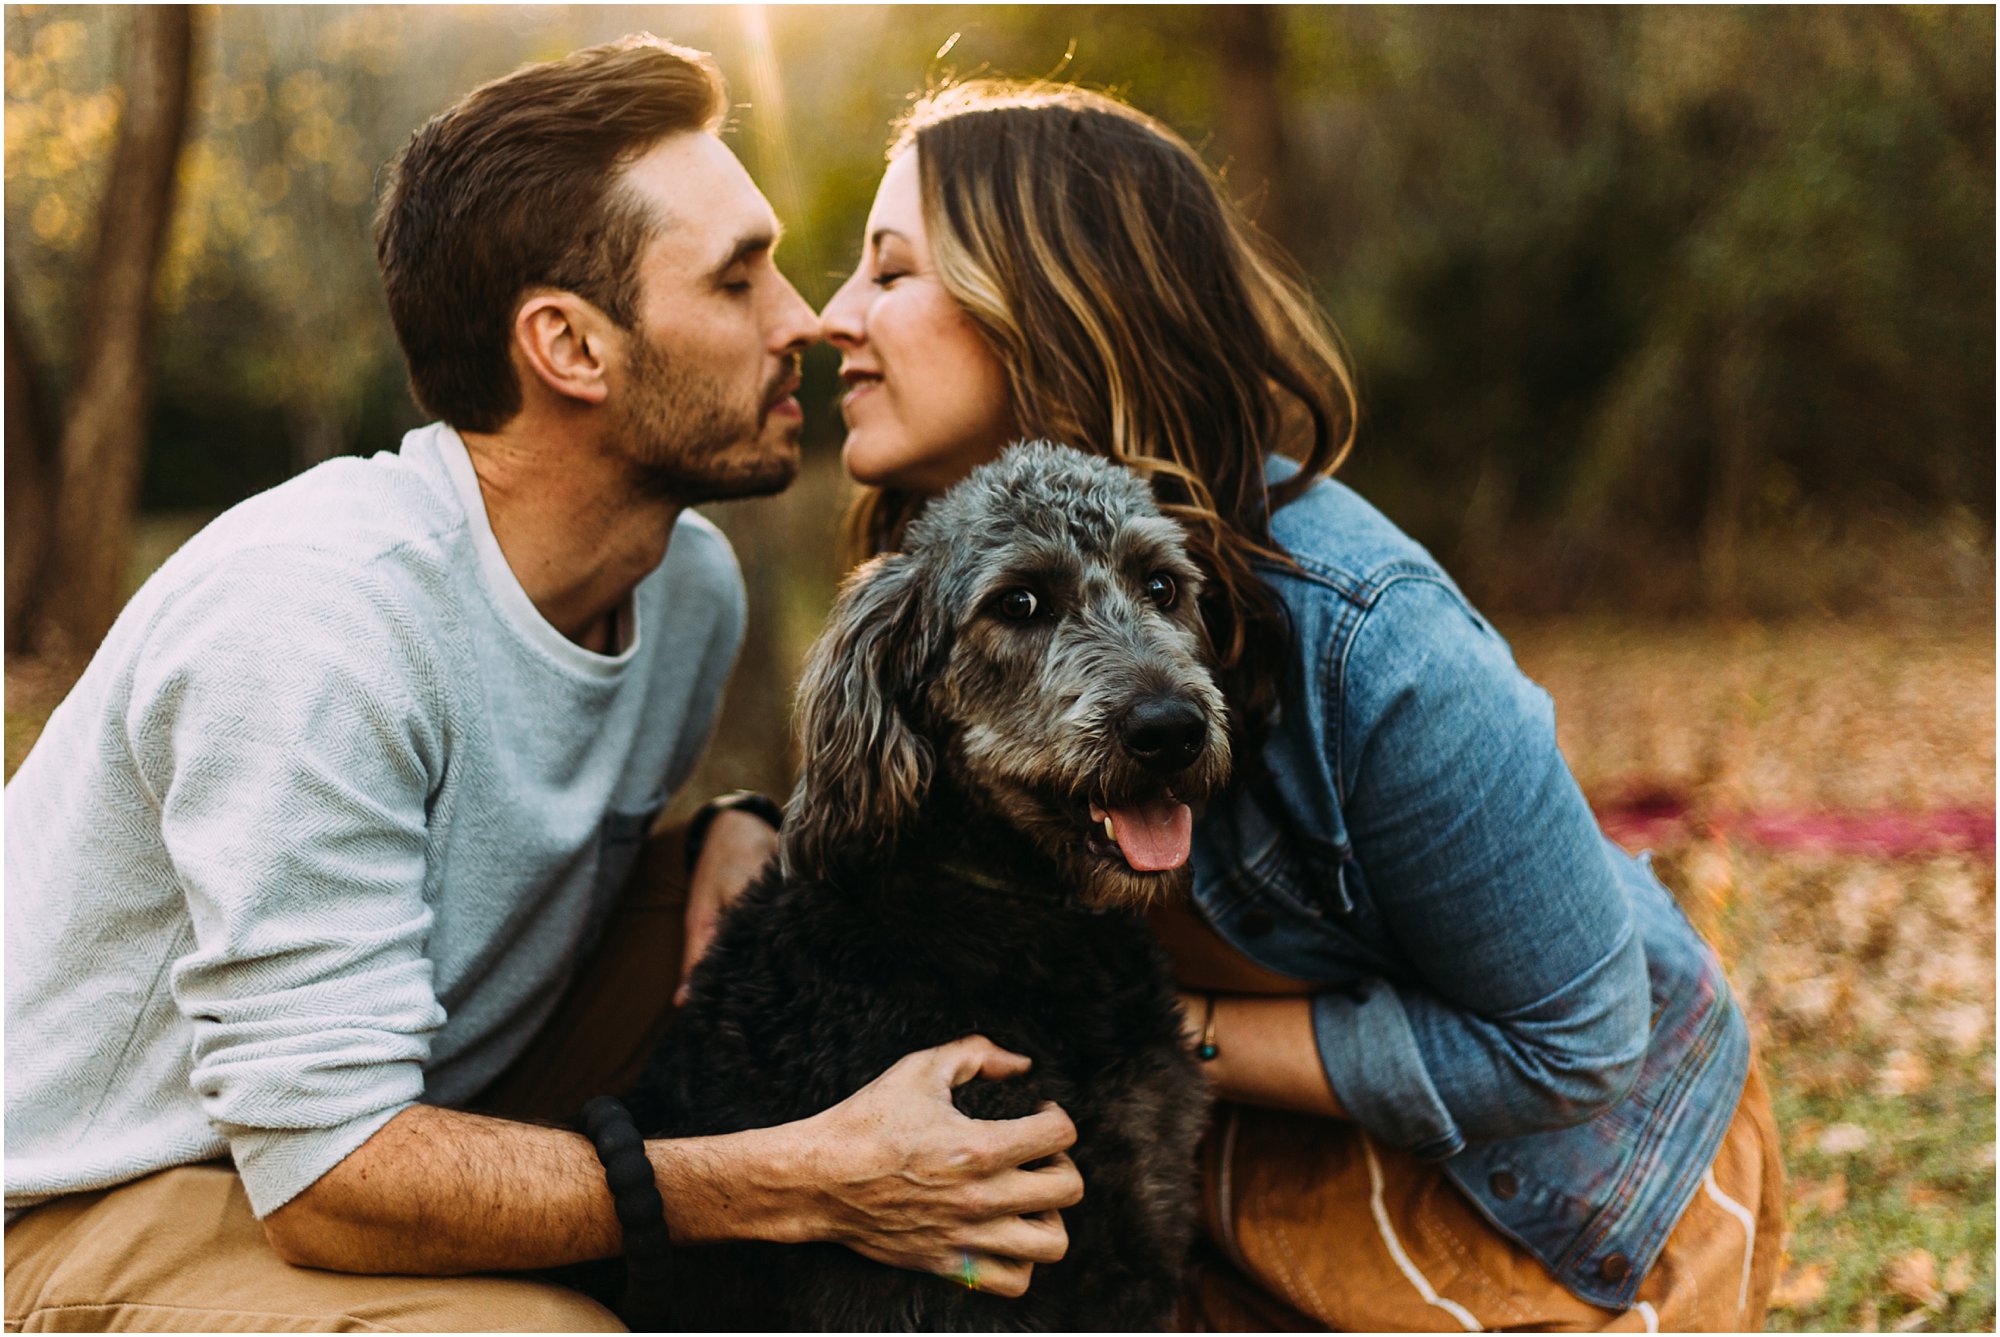 Couple going in for a kiss while their dog smiles at the camera